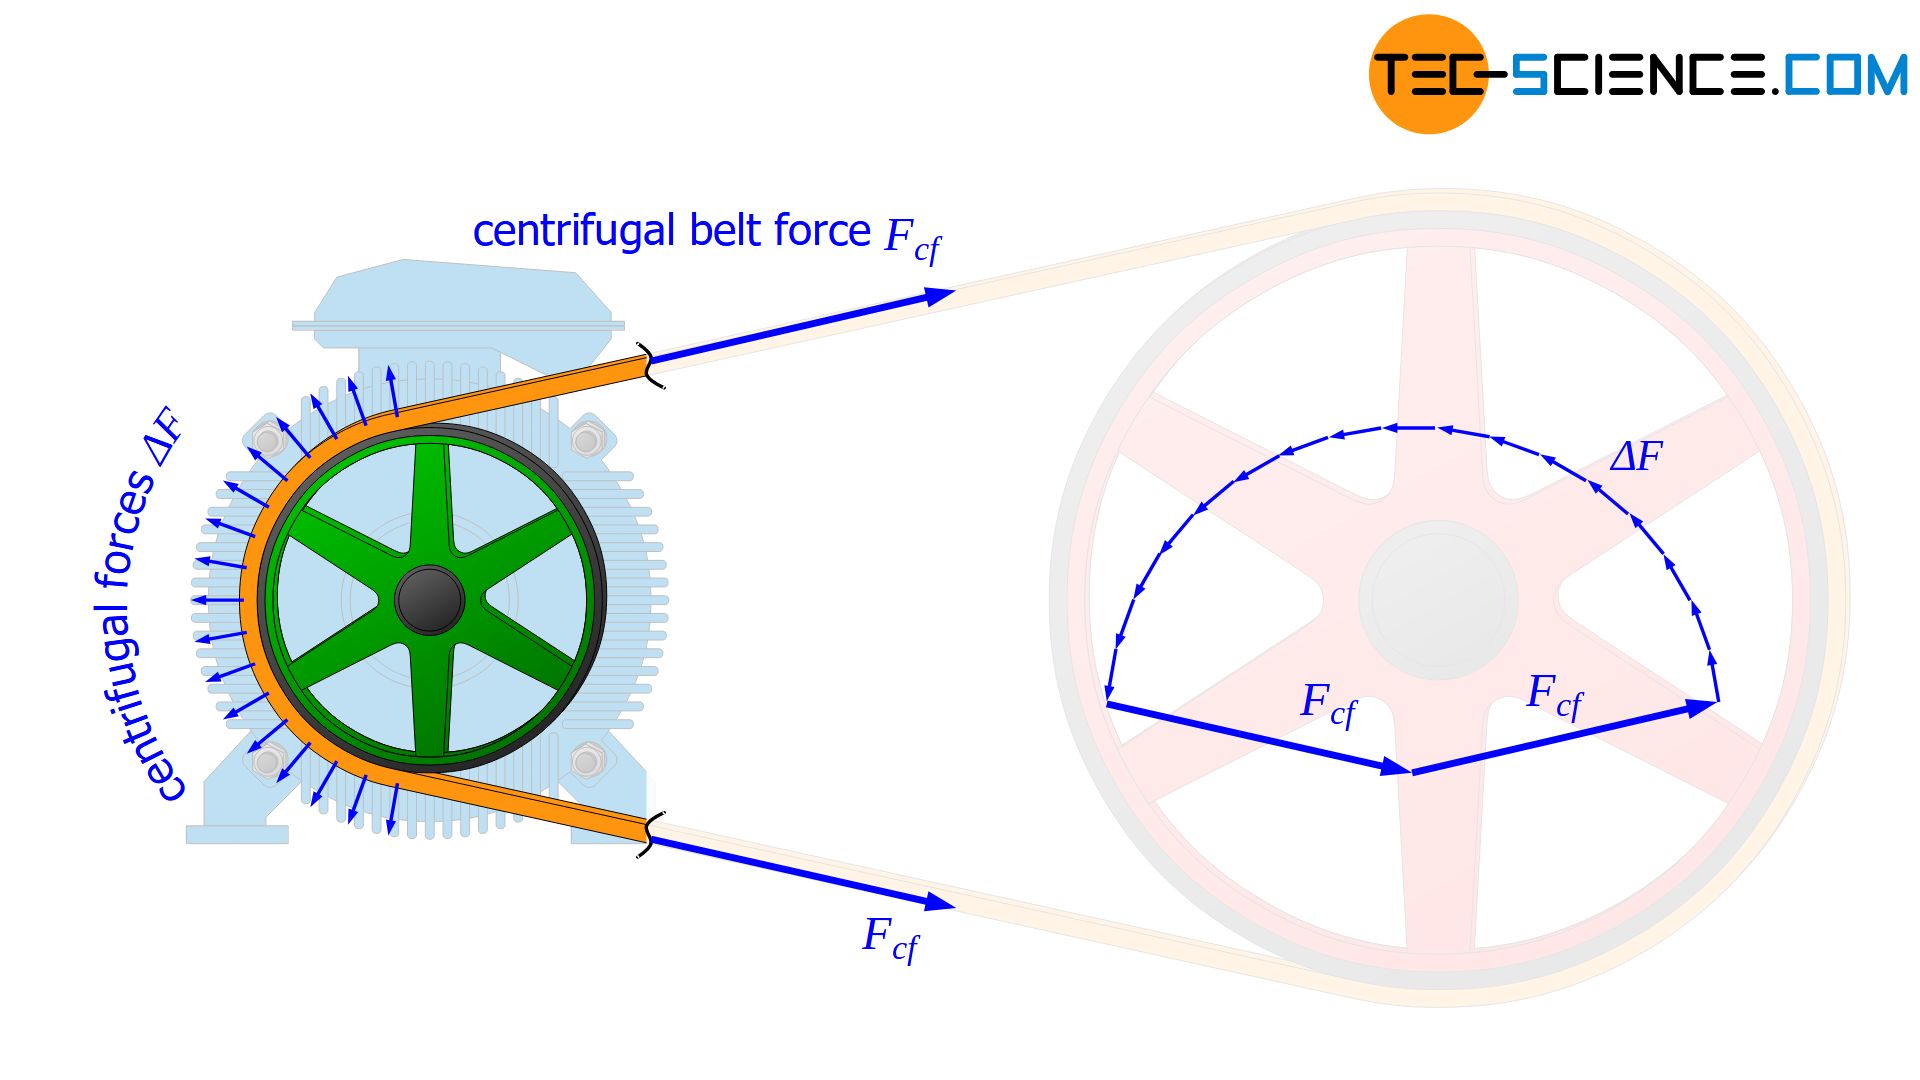 Addition of the centrifugal forces and the centrifugal belt force